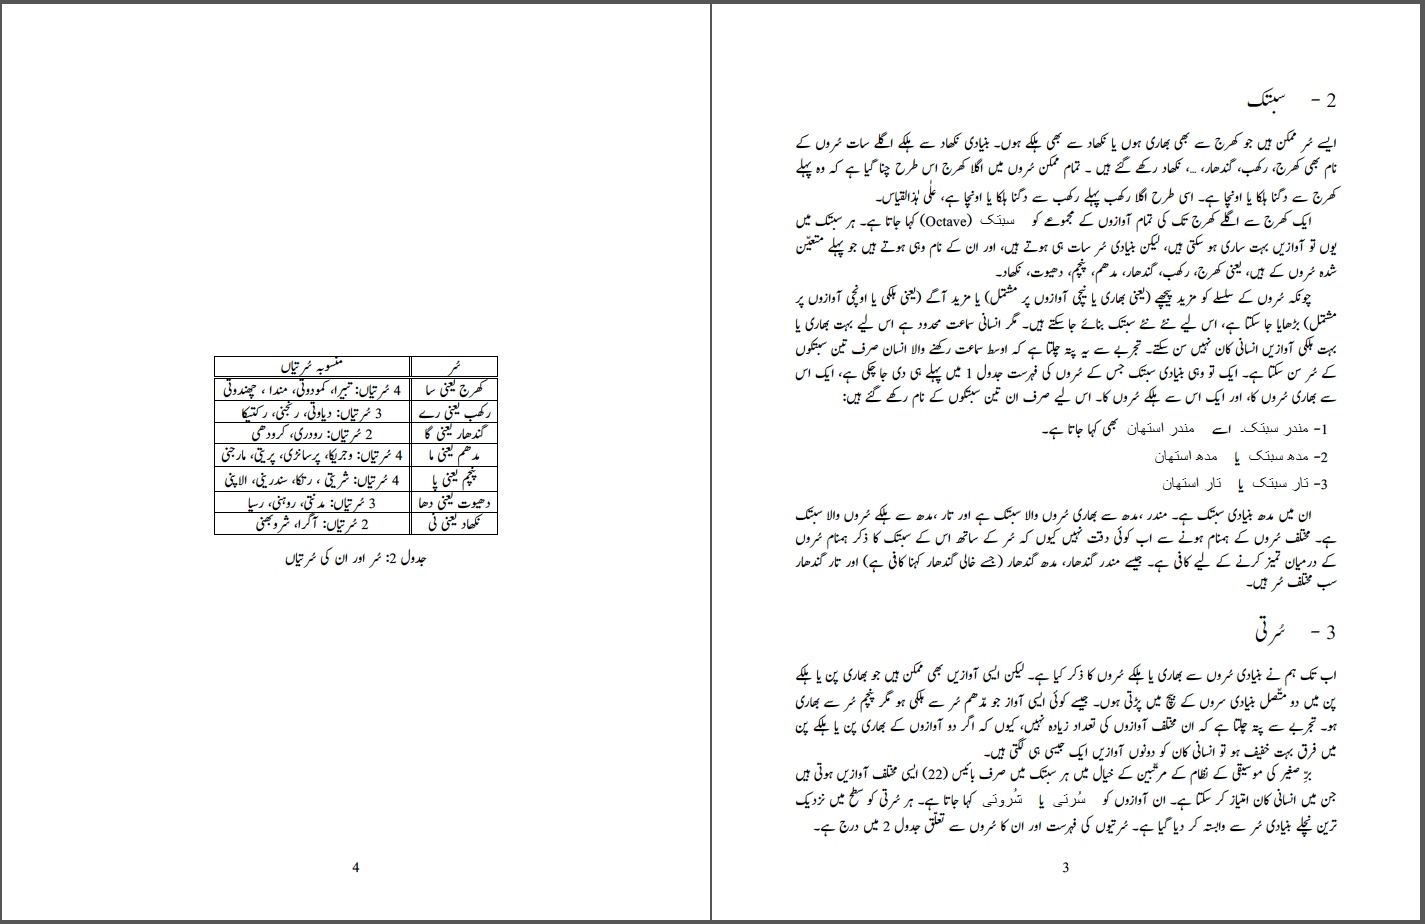 10 page essay quaid e azam for class 7 in urdu meaning